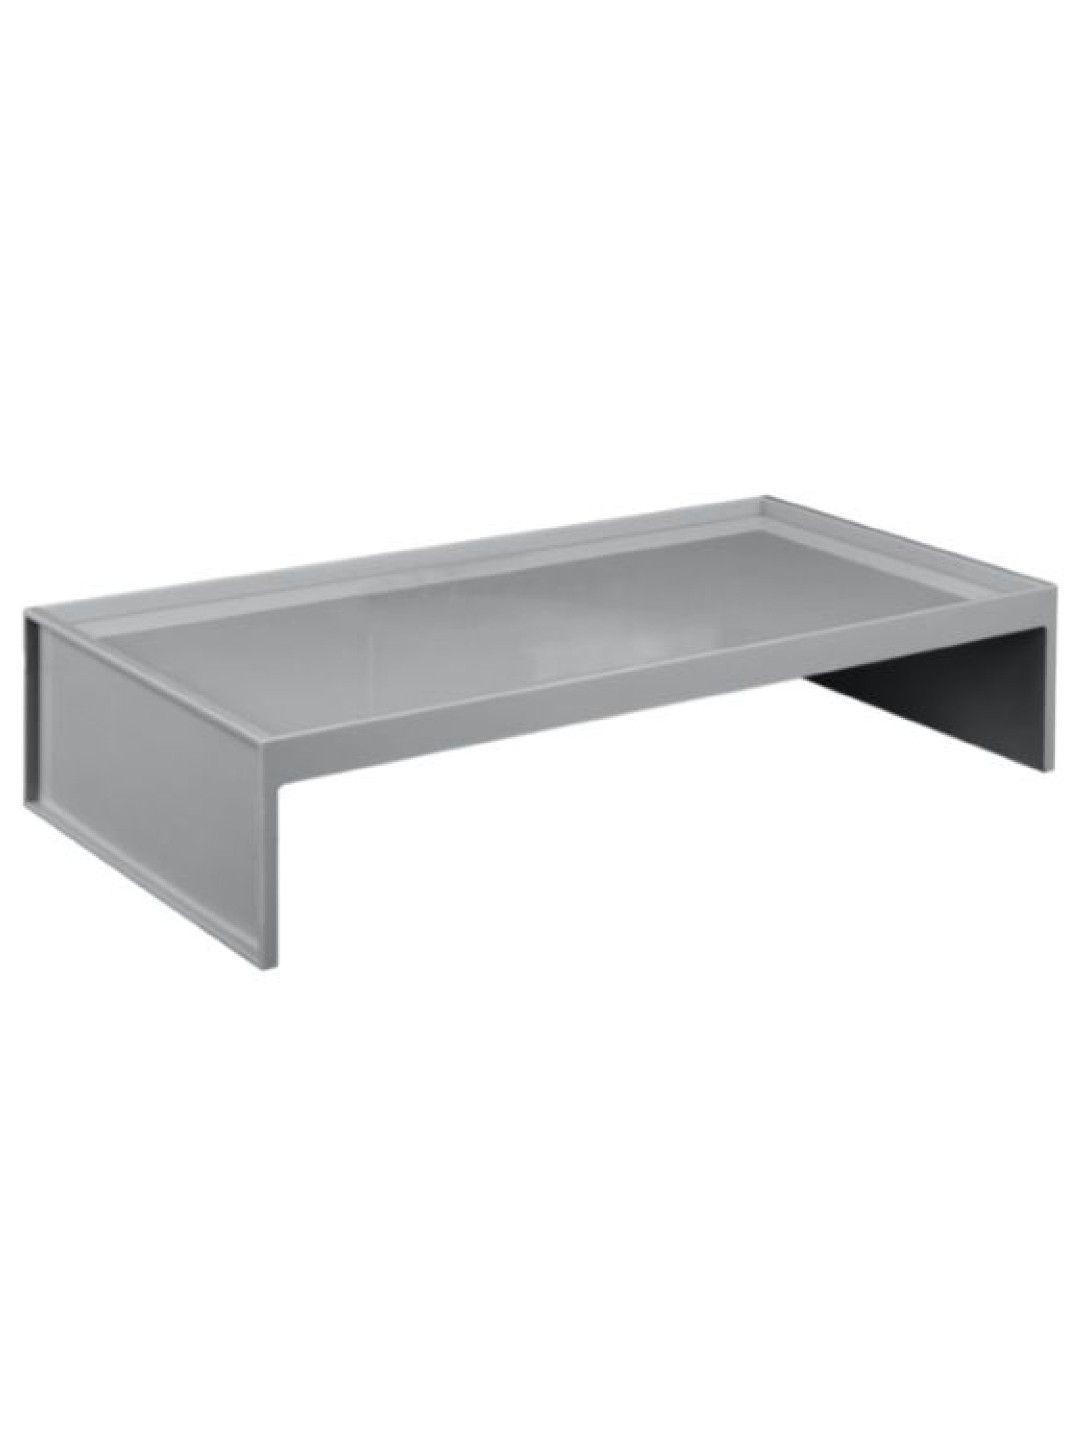 Sunbeams Lifestyle Gray Label Premium Monitor Stand (No Color- Image 1)